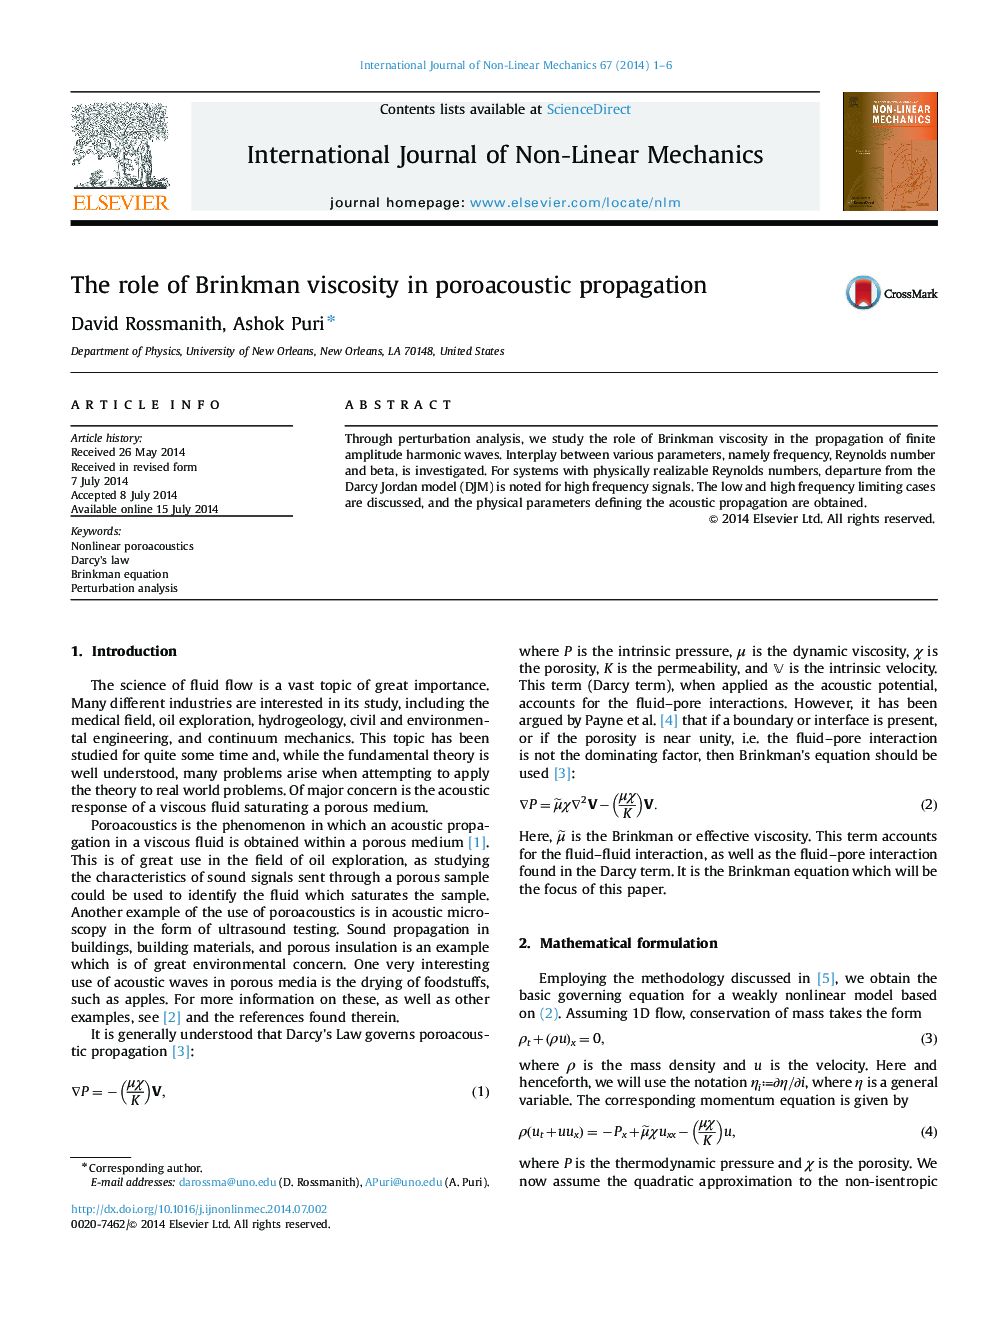 The role of Brinkman viscosity in poroacoustic propagation